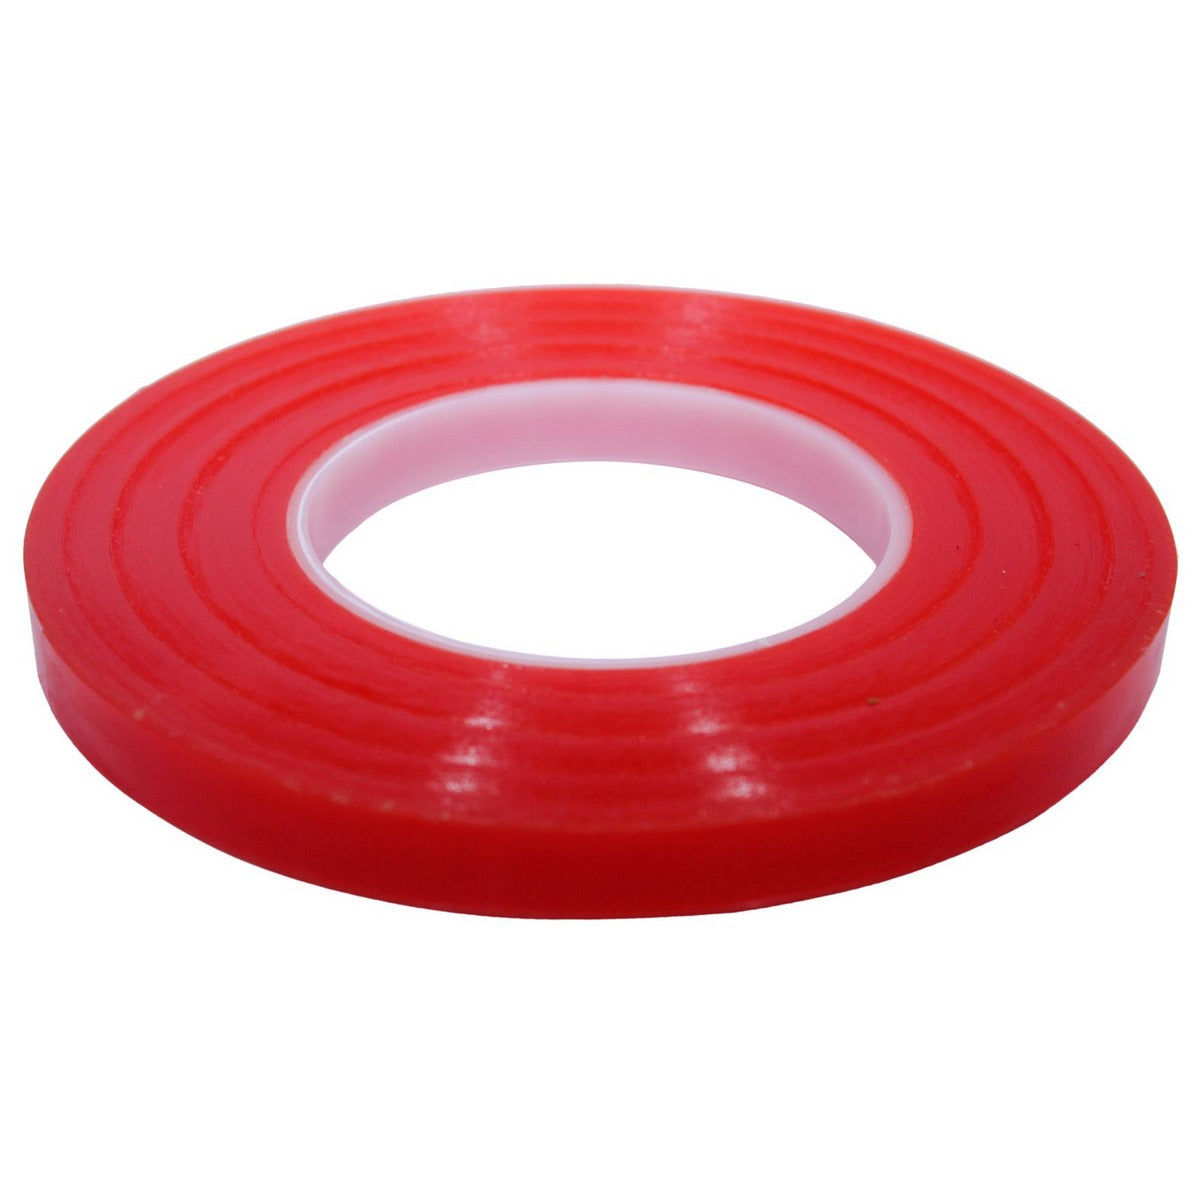 jags-mumbai Two way tape Tape Double Sided Red 1/4 Inch 6mm 50mtr